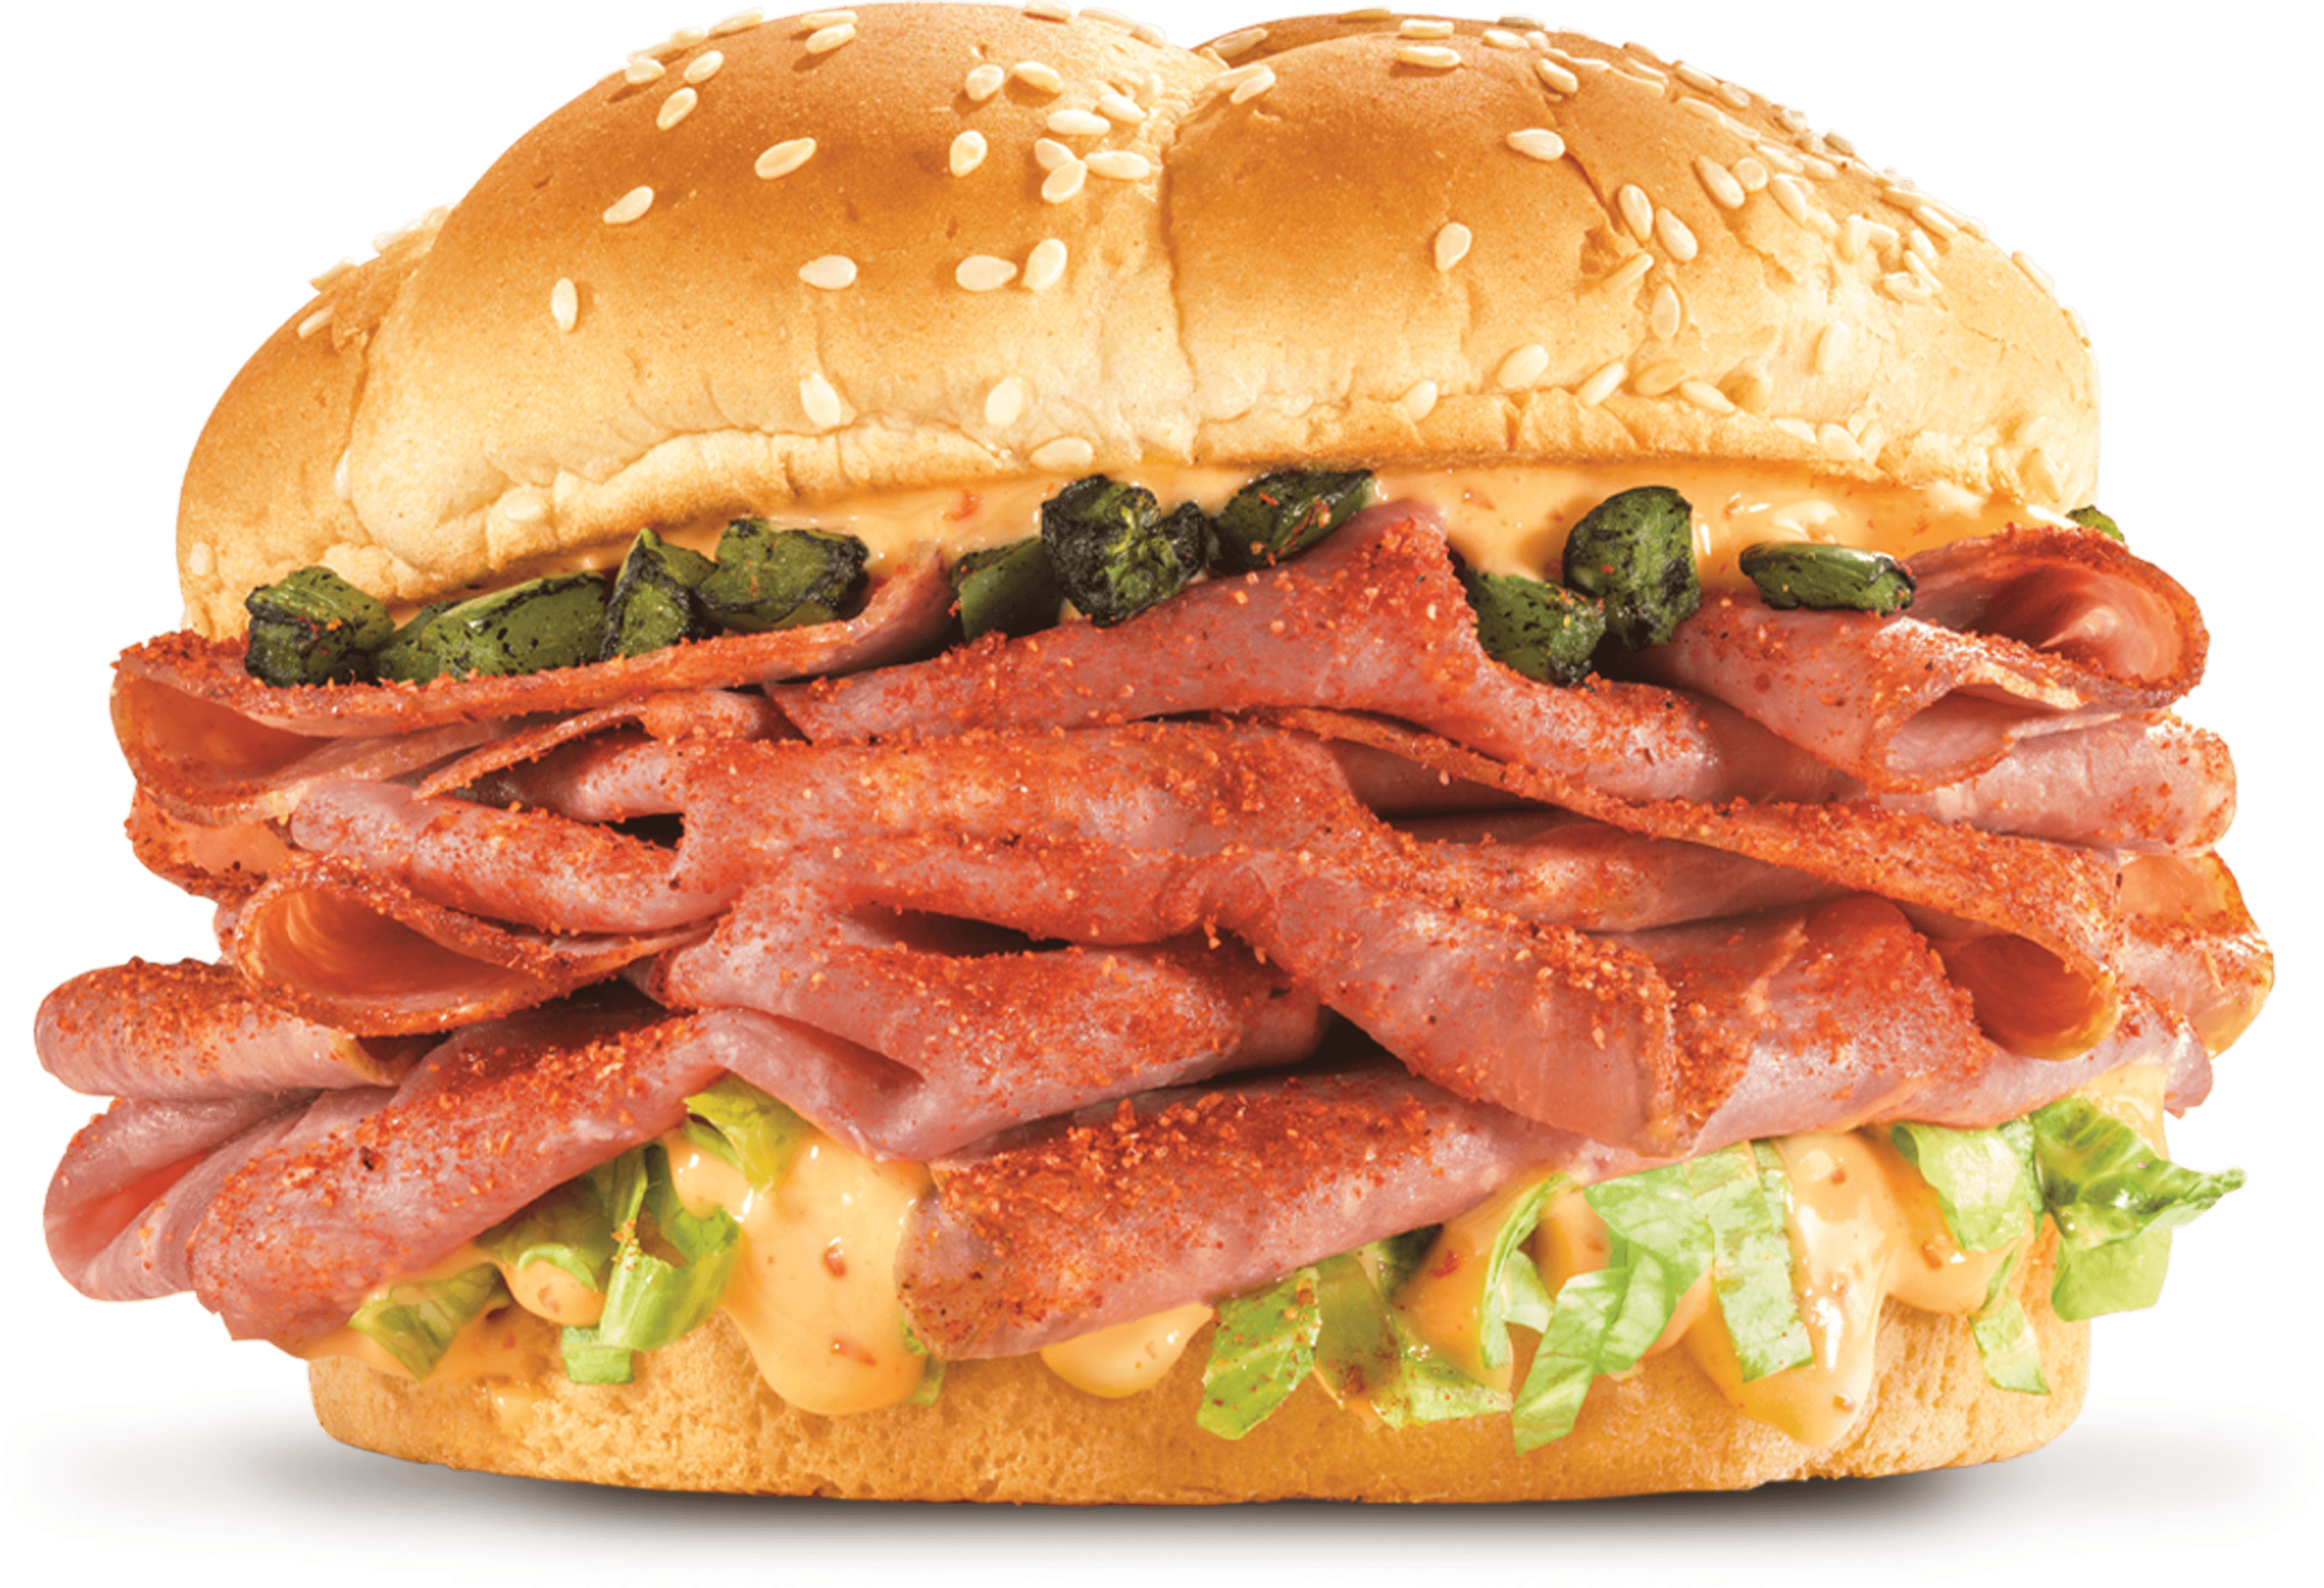 Arby's Spicy Roast Beef Sandwich Nutrition Facts